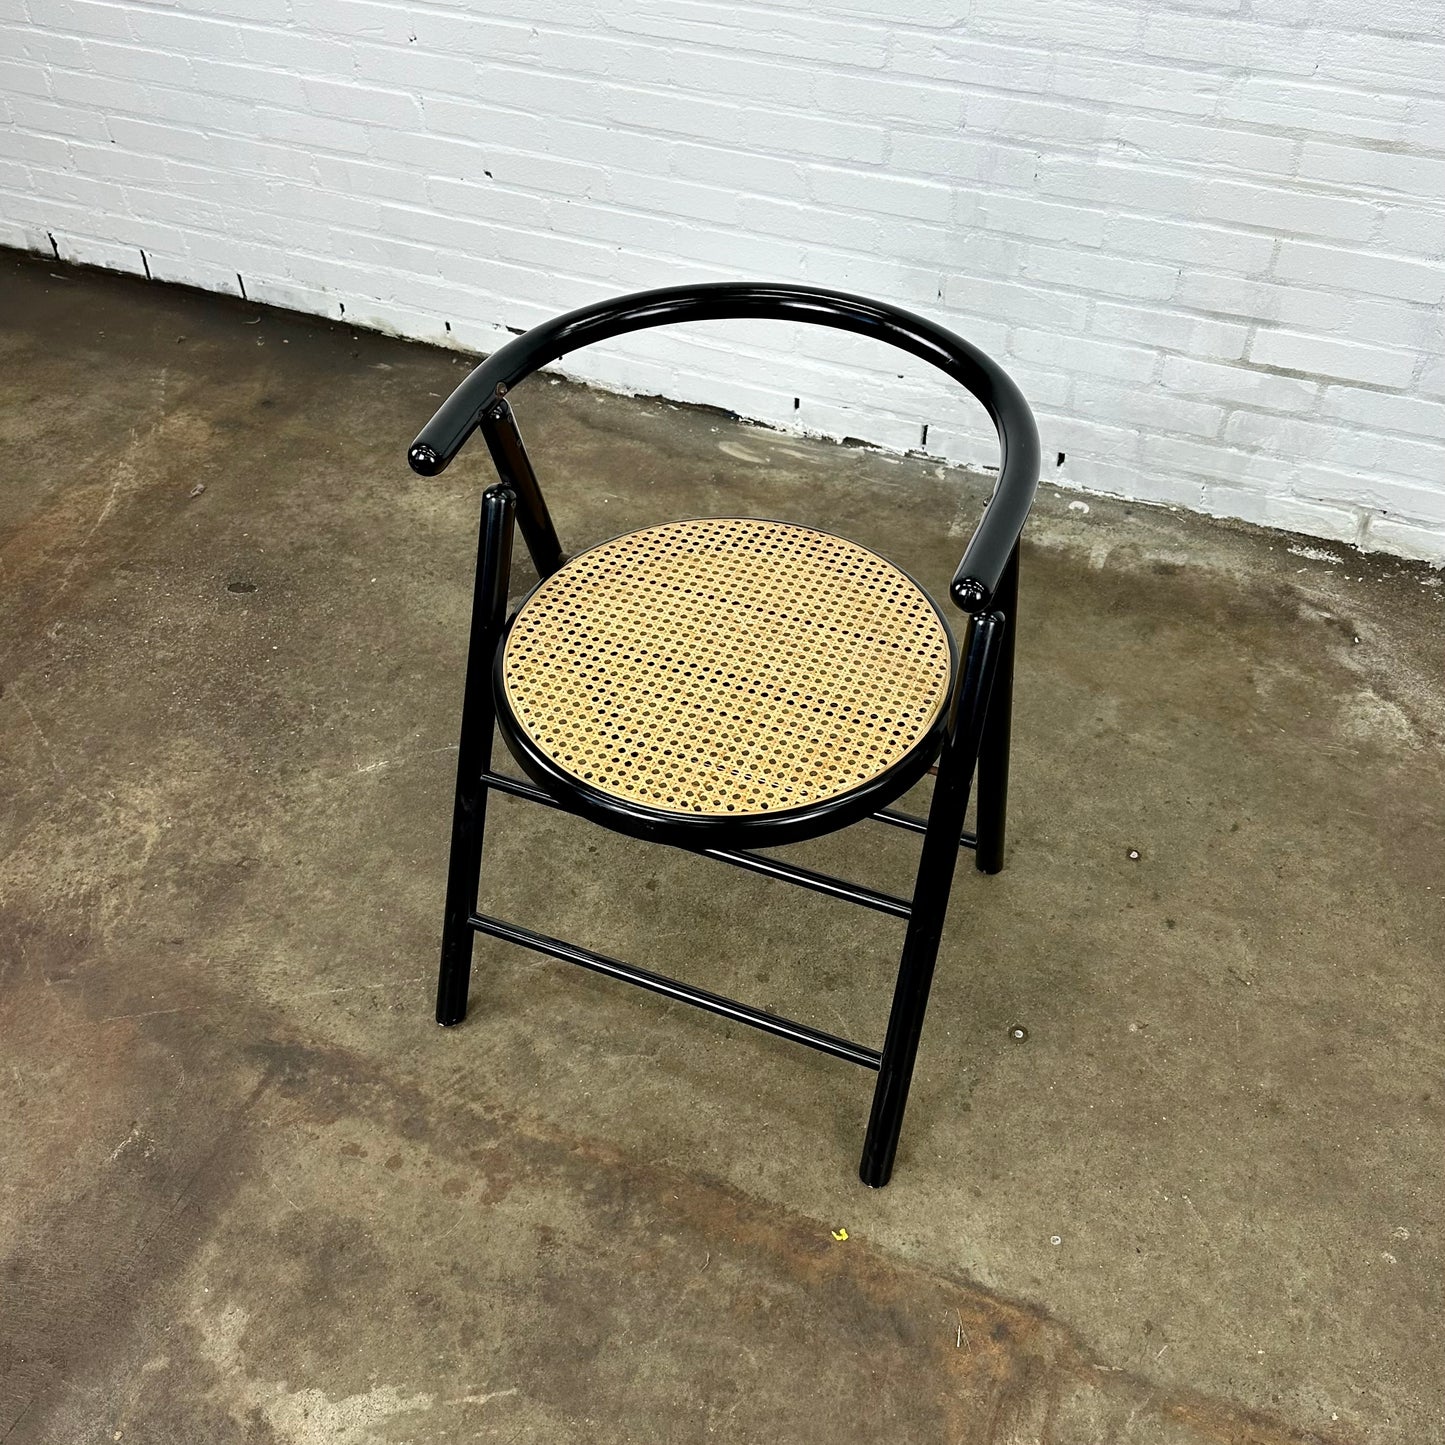 Vintage folding chair with rattan